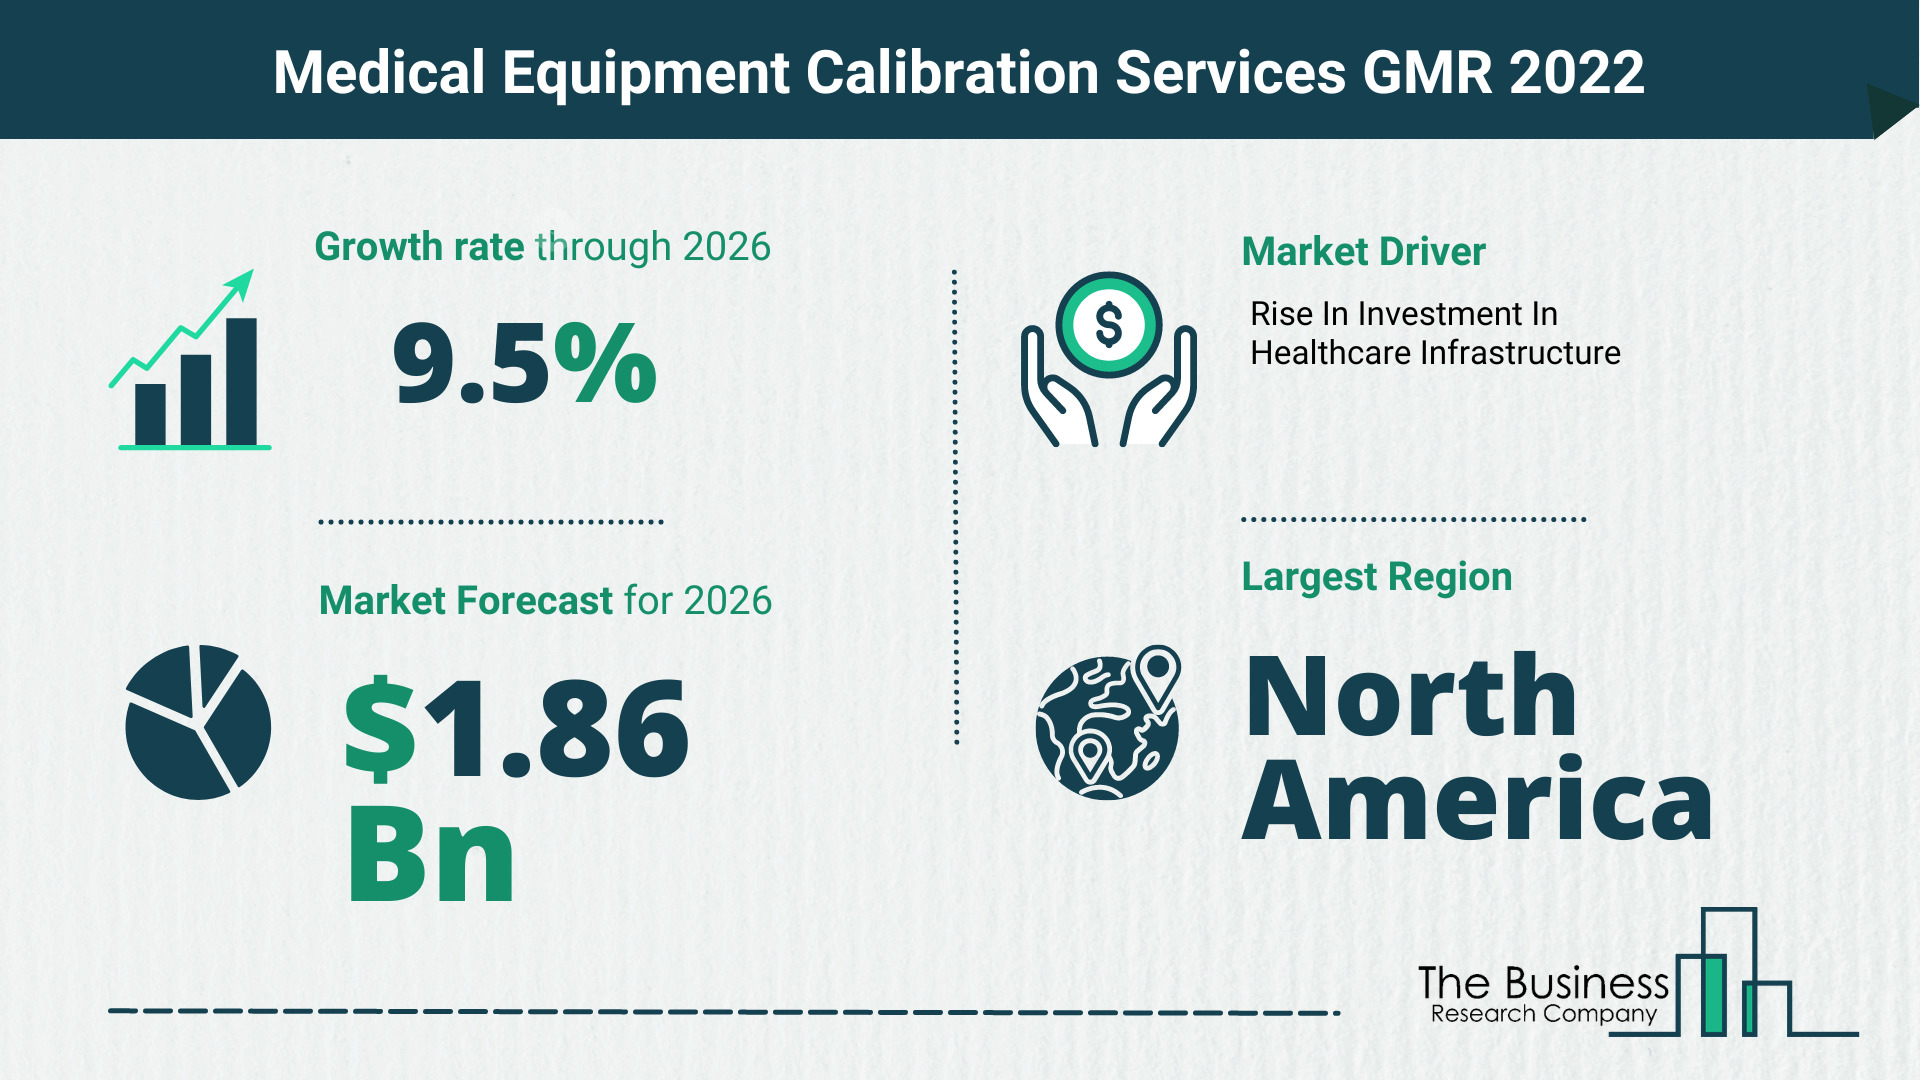 What Is The Medical Equipment Calibration Services Market Overview In 2022?